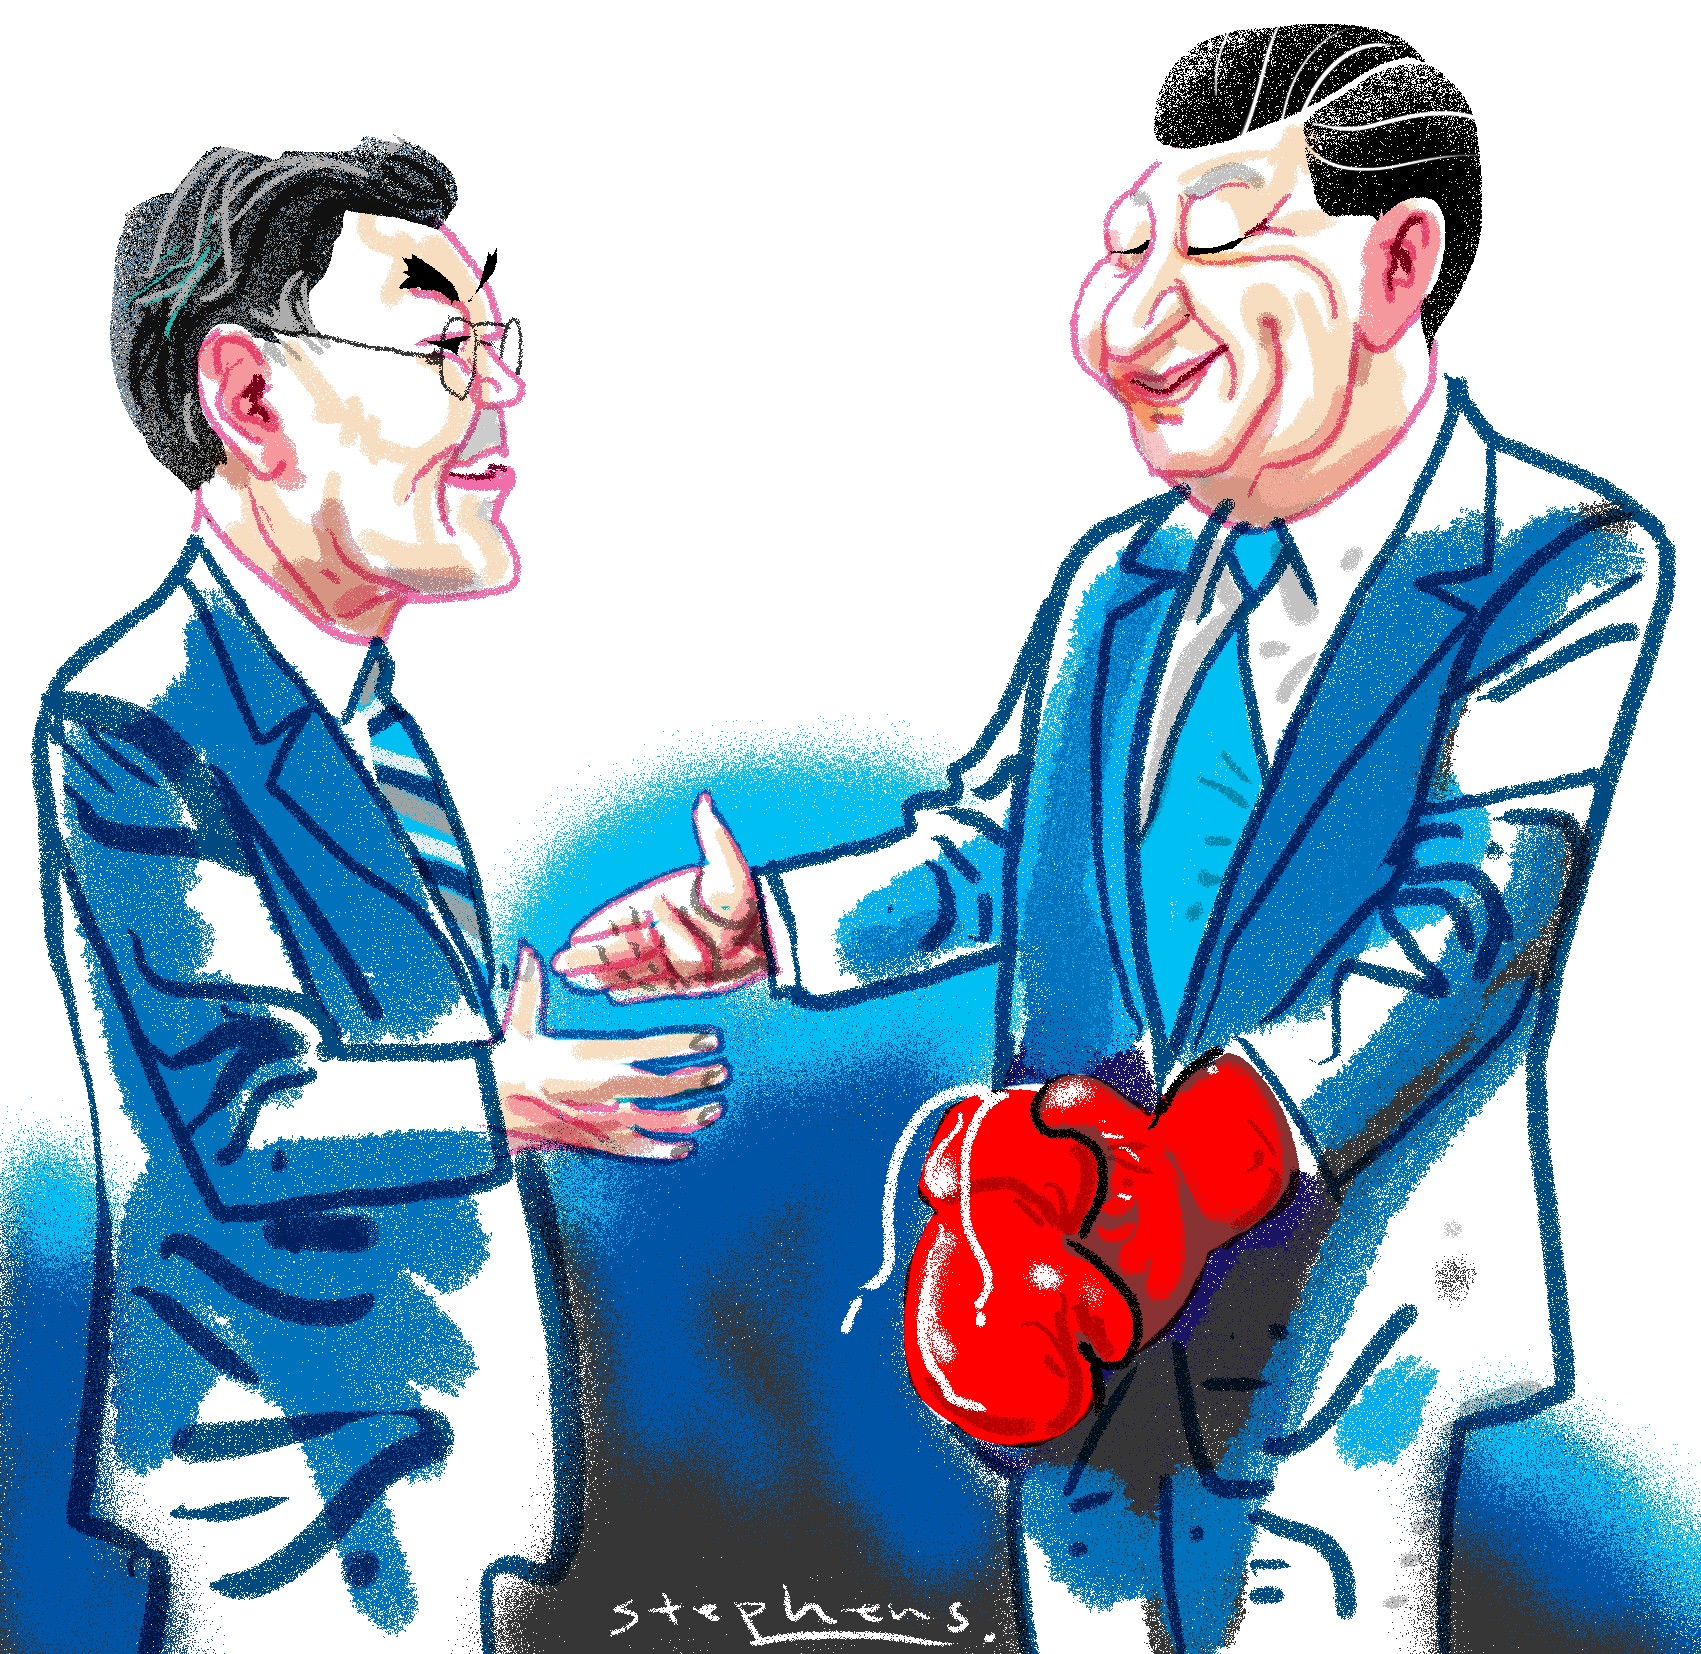 Zhang Baohui says the rapprochement between Beijing and Seoul, after relations were damaged over THAAD, has much to do with a more moderate Chinese foreign policy, inspired in no small part by the erosion of American soft power under an isolationist Donald Trump